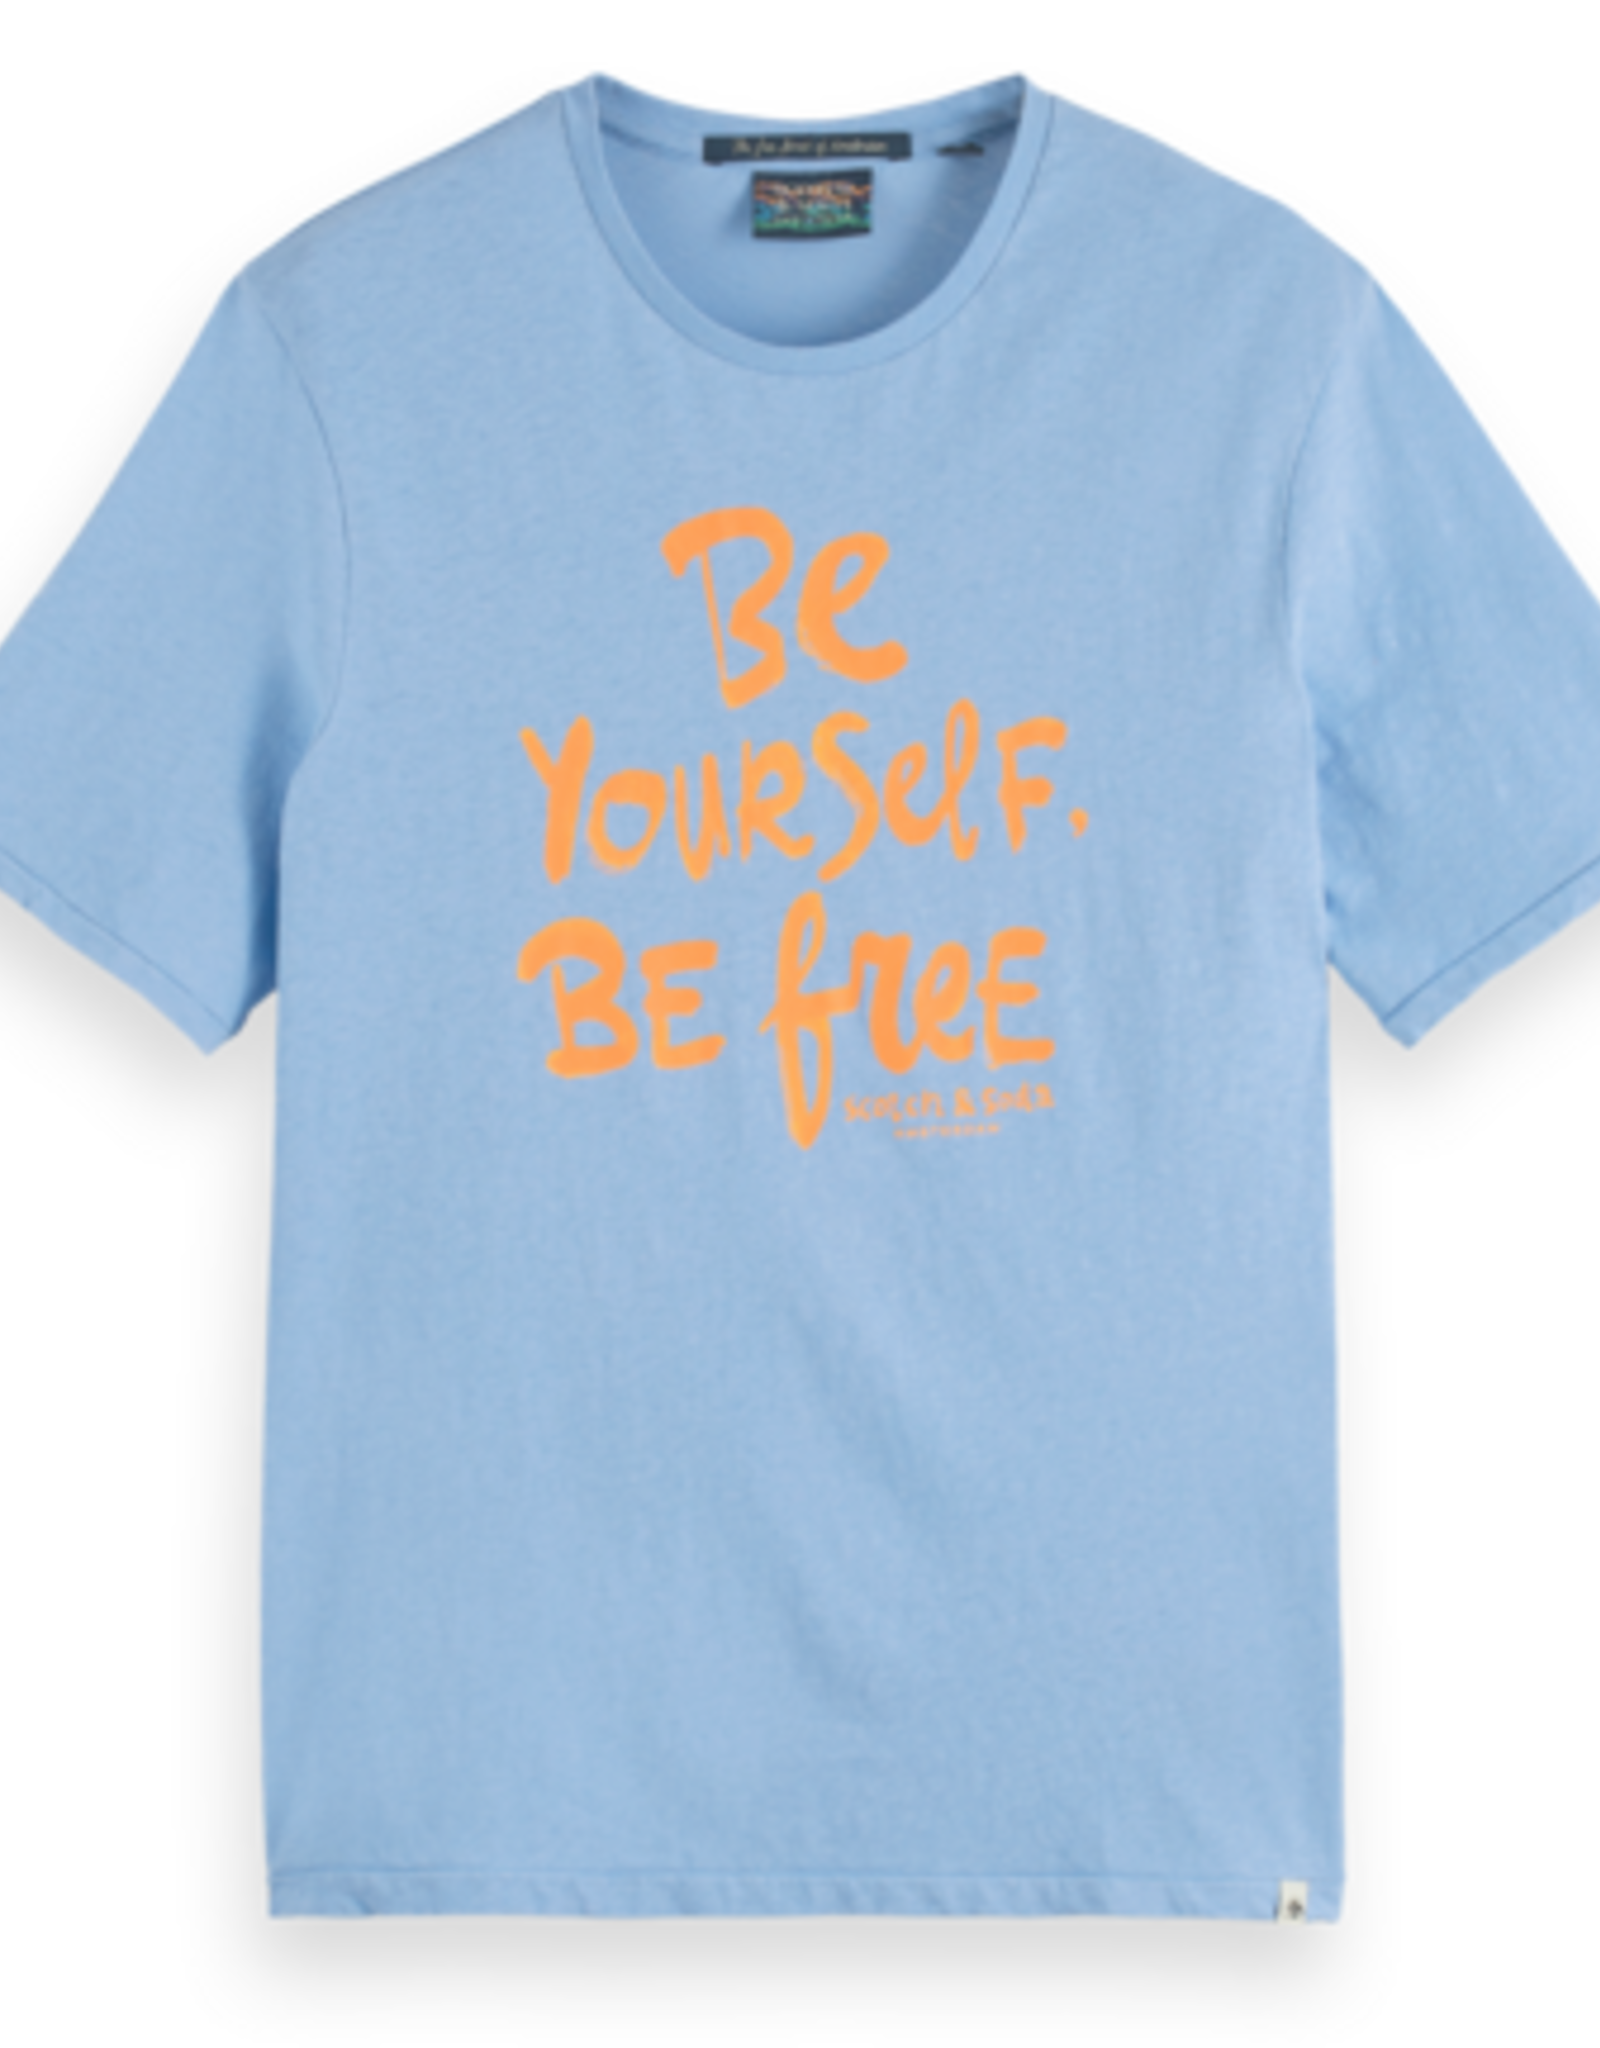 Scotch & Soda SS COTON-LINEN JERSEY BE YOURSELF BE FREE TSHIRT